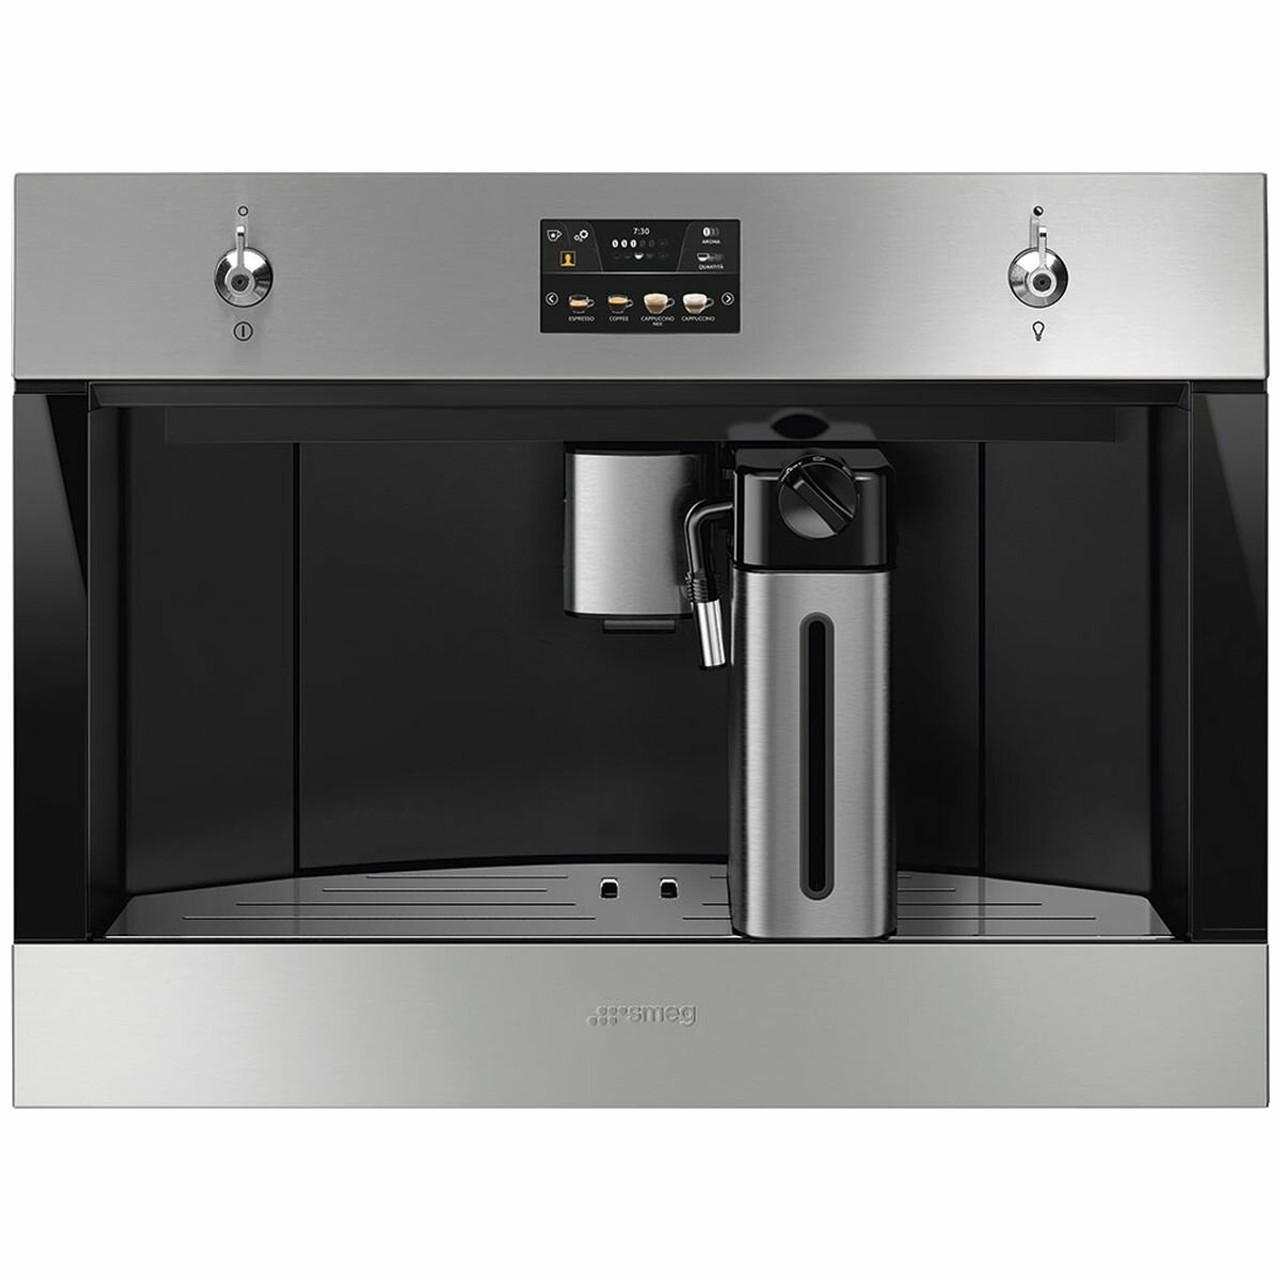 CMS4303X - Classic Aesthetic Coffee Machine - Stainless Steel